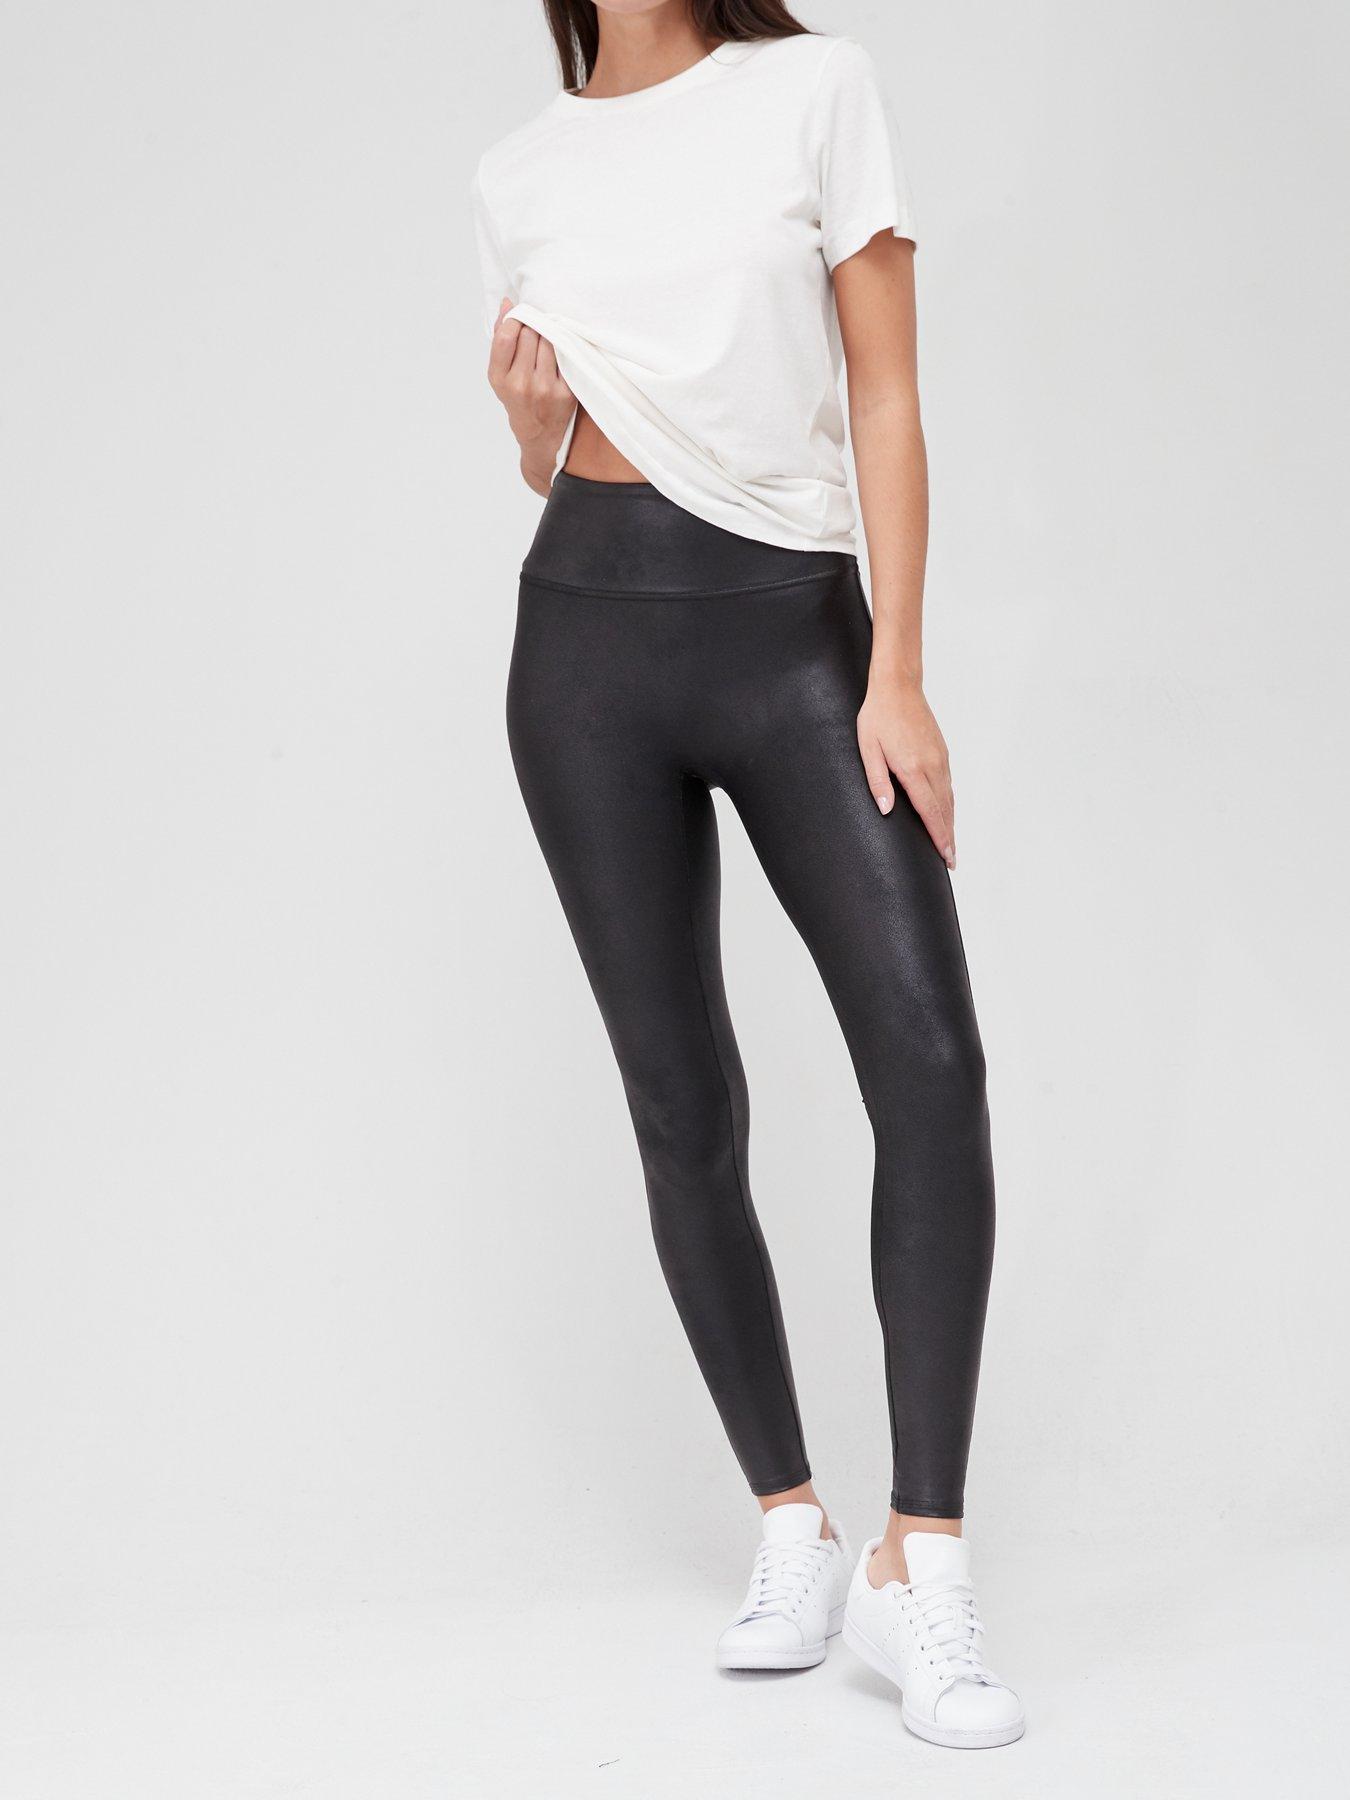 Spanx Leggings Review Ireland Covid  International Society of Precision  Agriculture